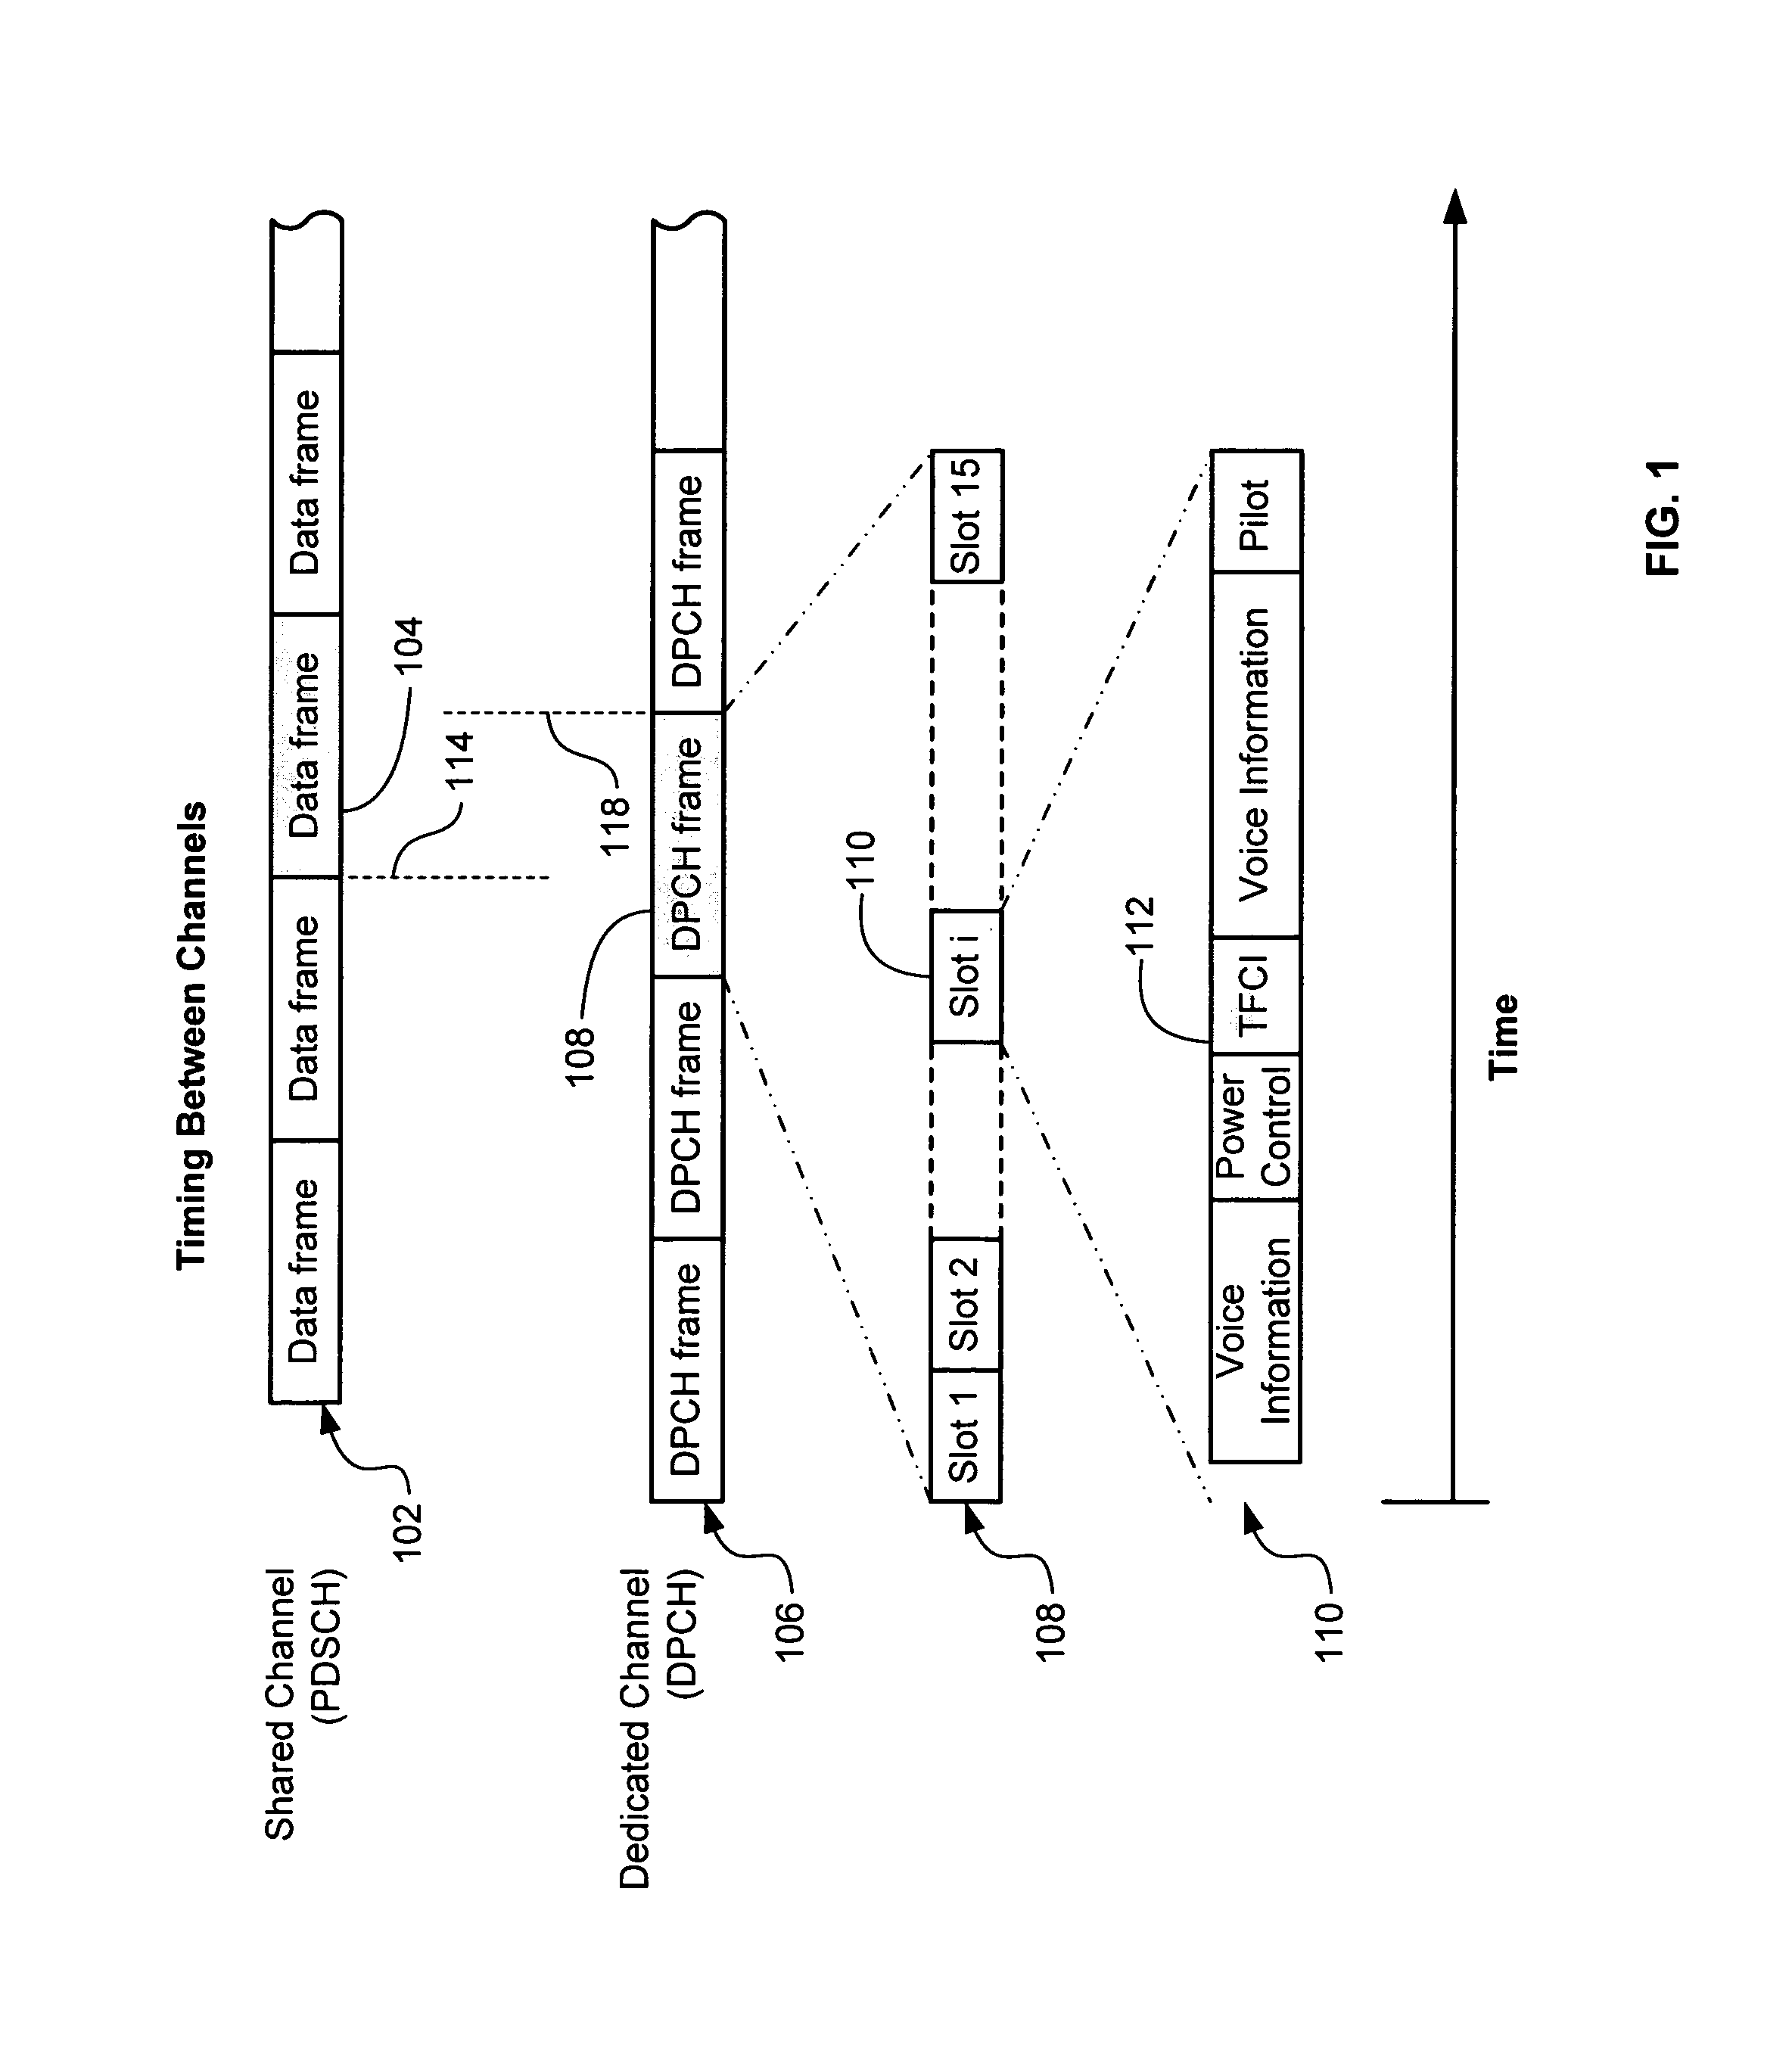 Method and system for data and voice transmission over shared and dedicated channels